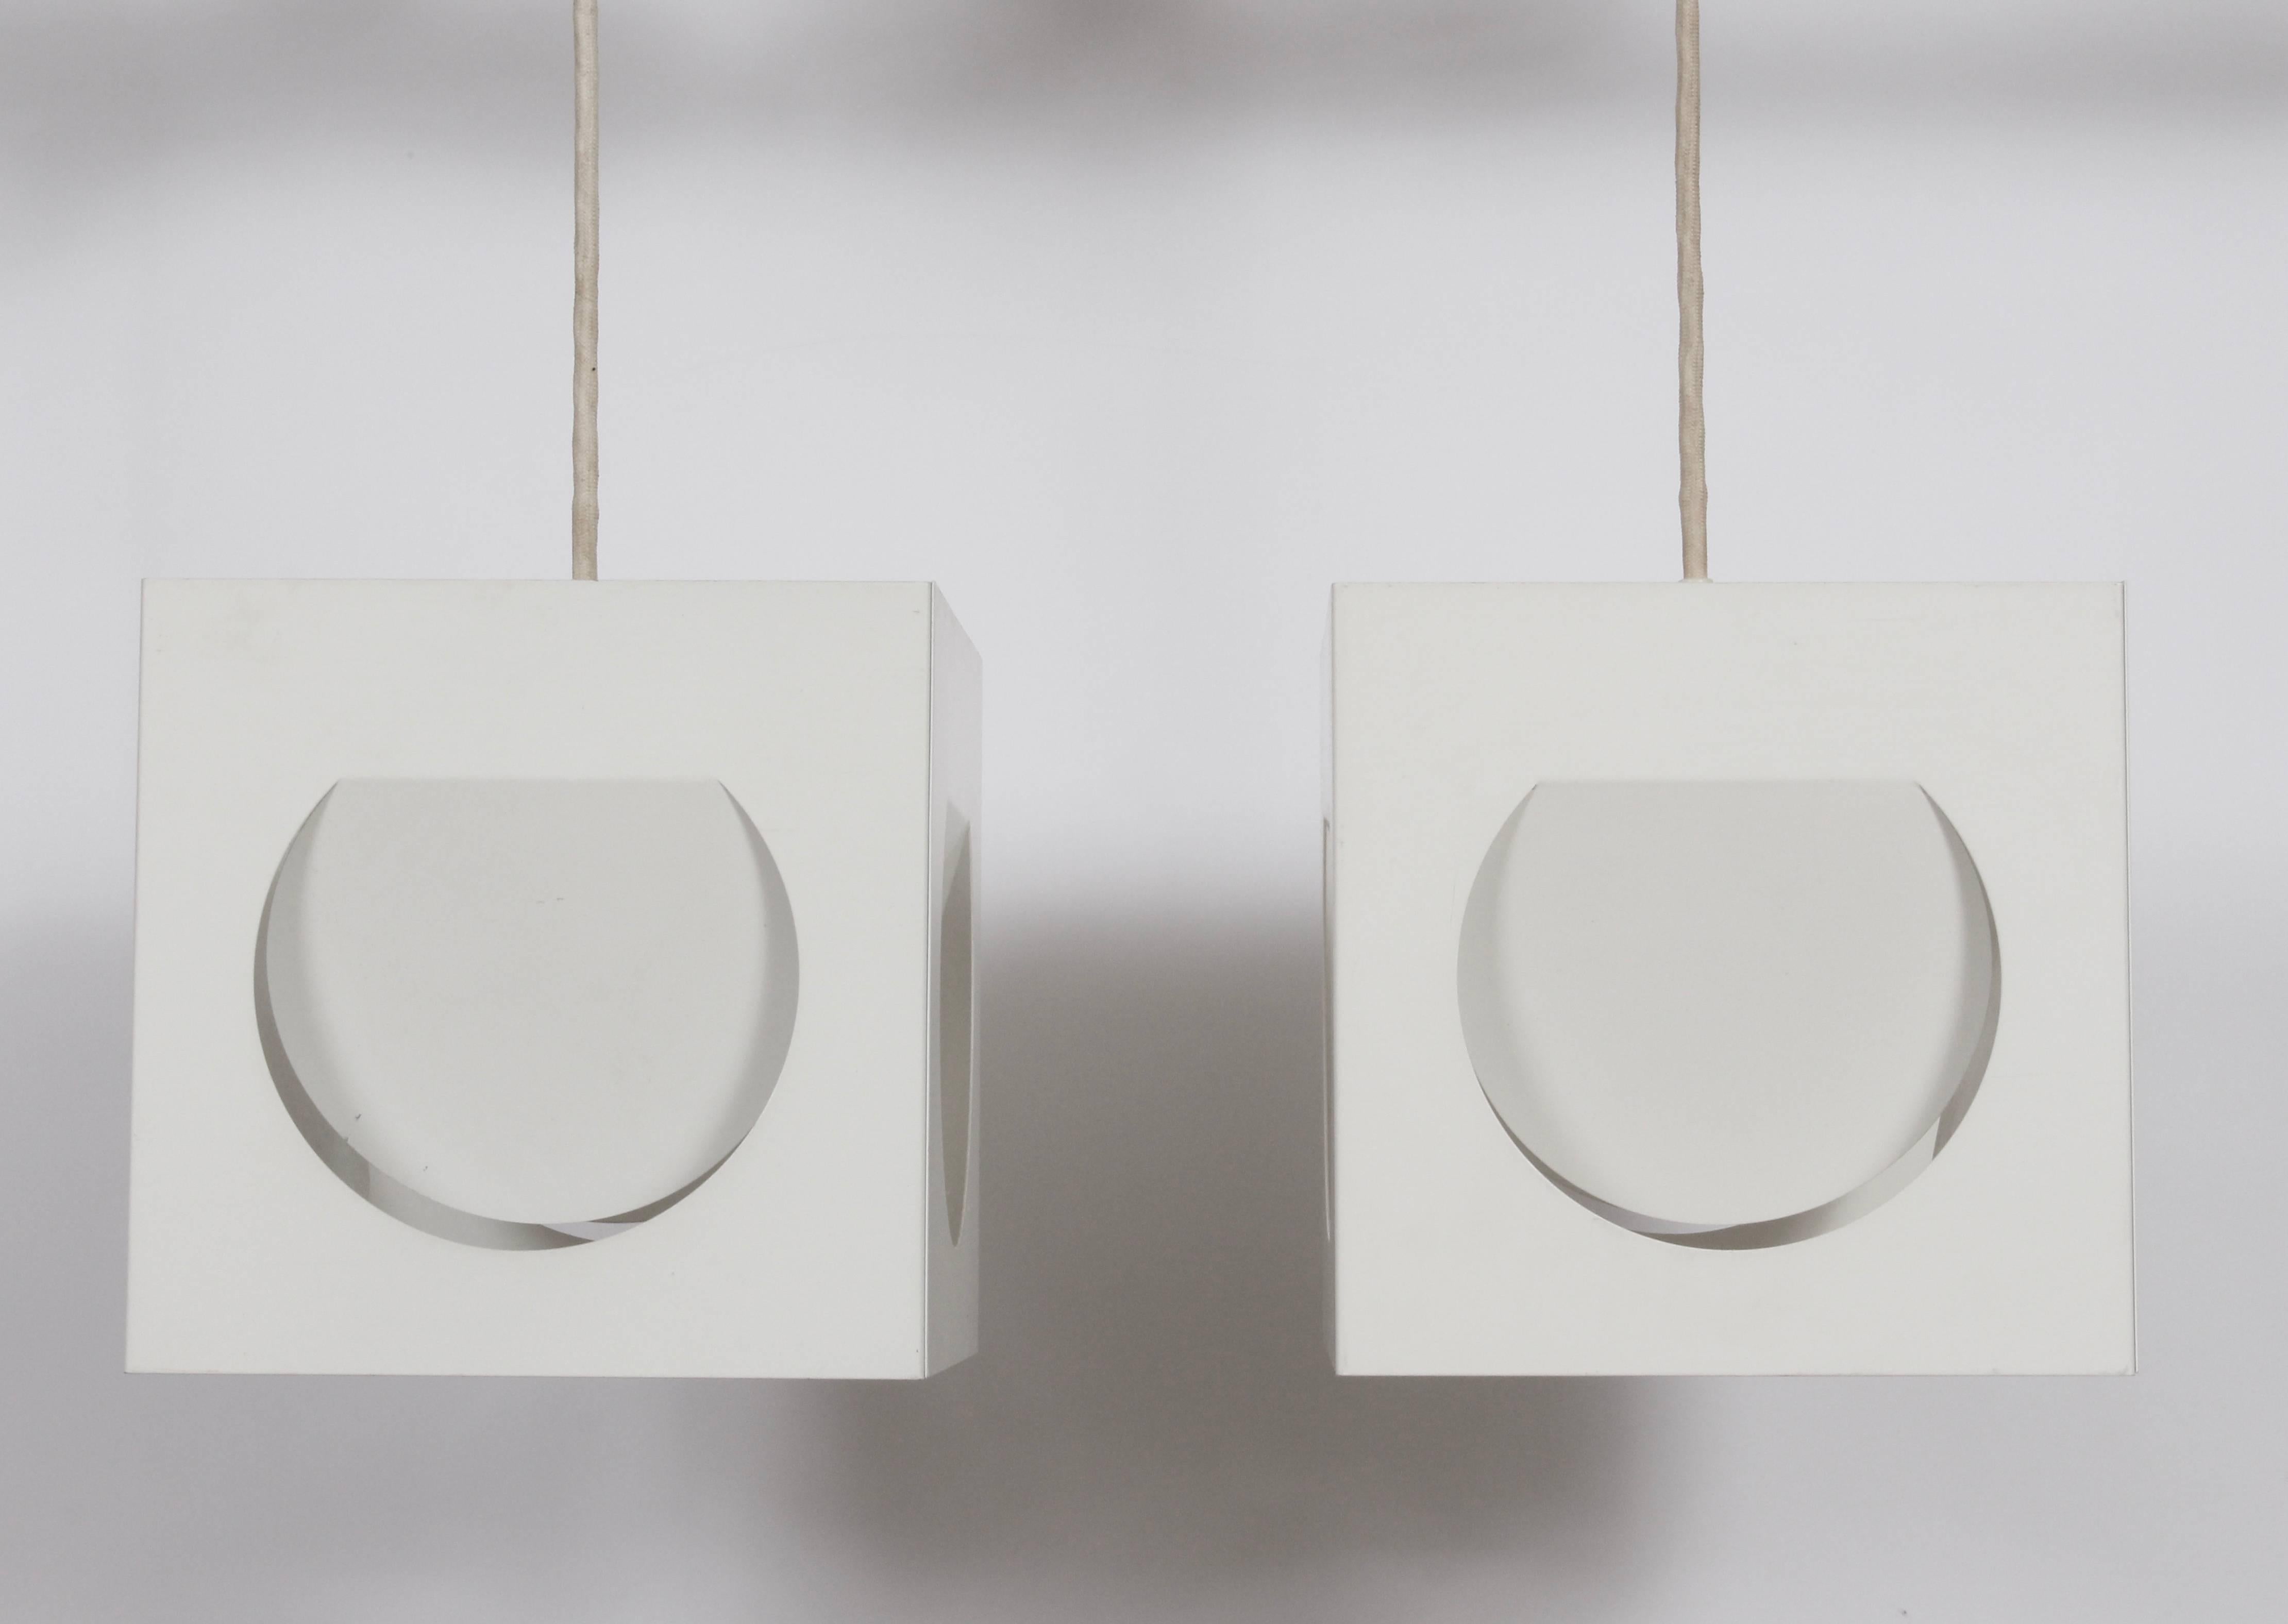 Pair of Shogo Suzuki for Stockmann Orno White Metal Cube Hanging Lamps, 1960s For Sale 1